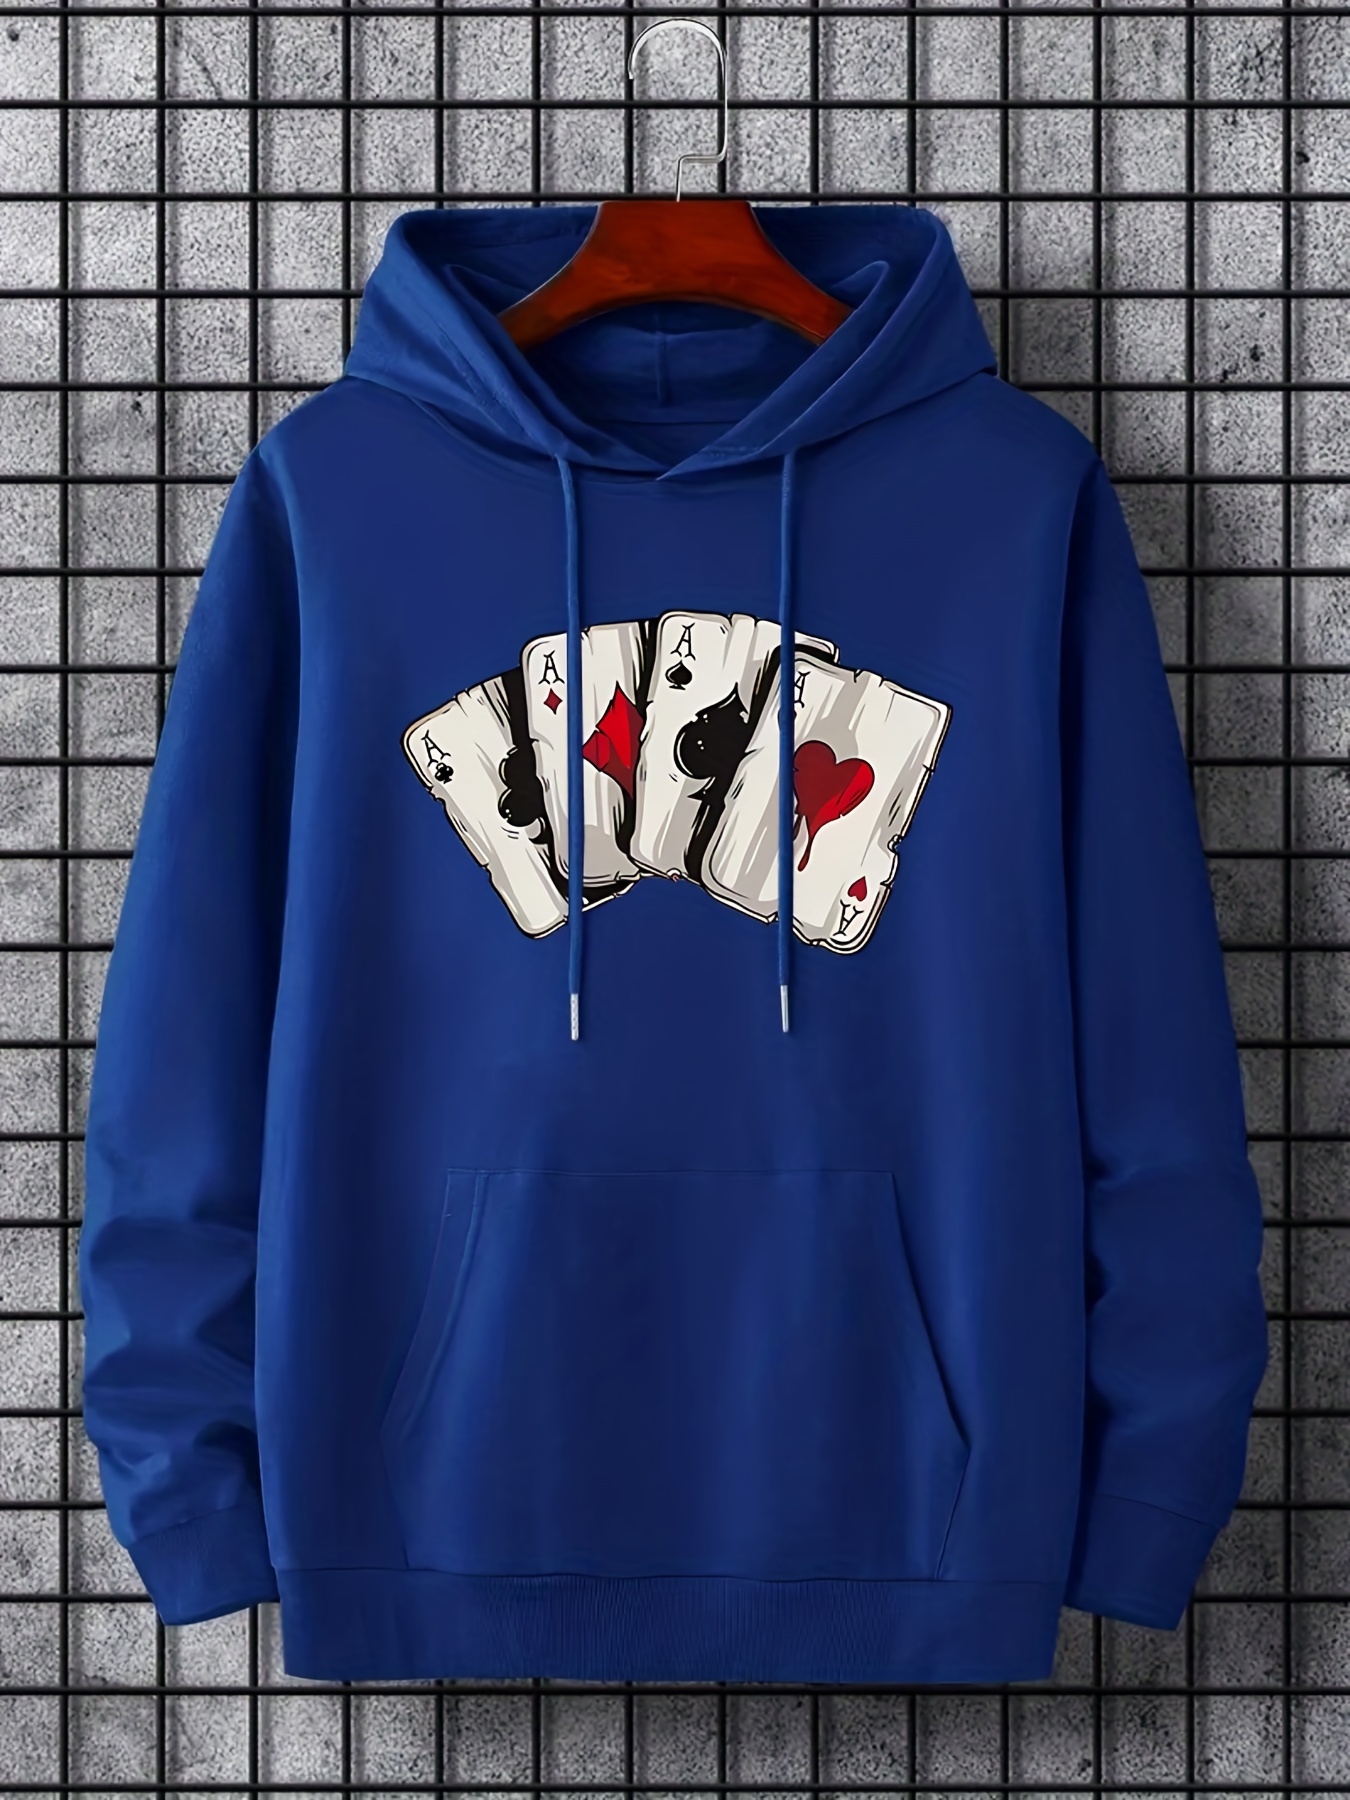 Hoodies For Men, Playing Card Ace Graphic Hoodie, Men’s Casual Pullover  Hooded Sweatshirt With Kangaroo Pocket For Spring Fall, As Gifts